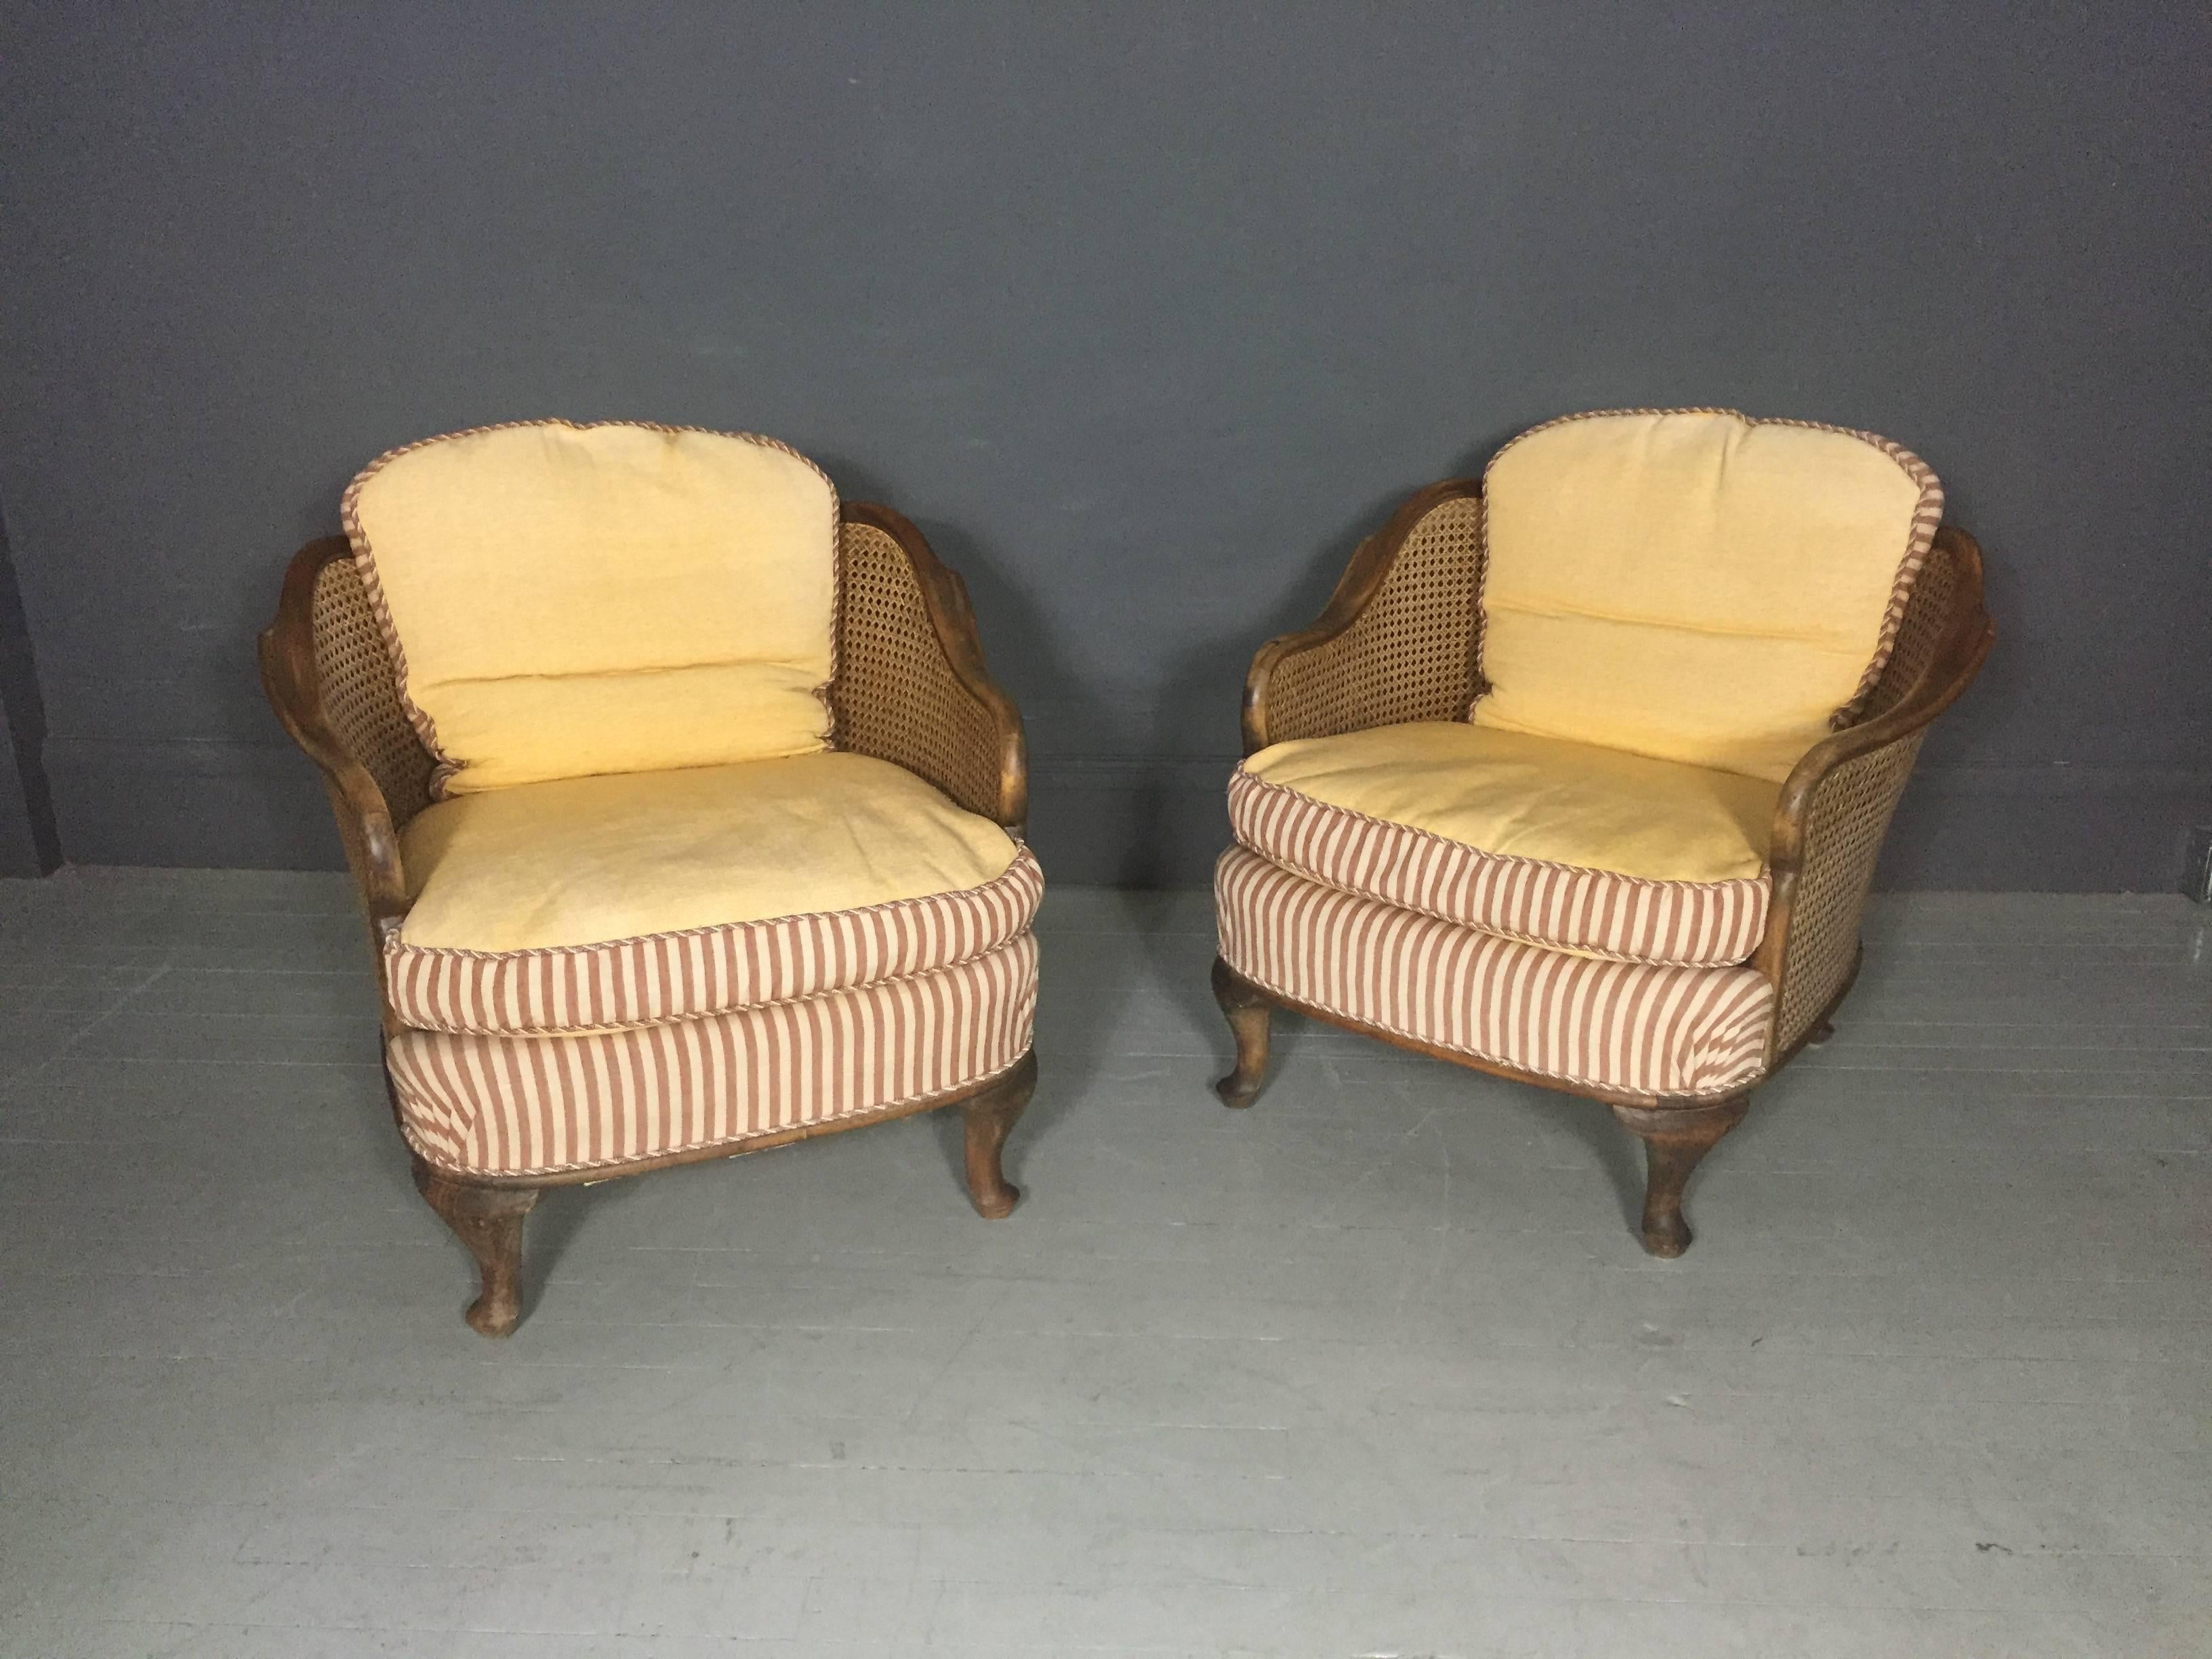 A lovely pair of tub chairs in the Bergere style with double woven cane on sides and back, sculpted walnut frames, short cabriole or pad-foot legs, wonderful yellow ribbed-brocade upholstery with deep-rose striped cotton front, matching corded trim,